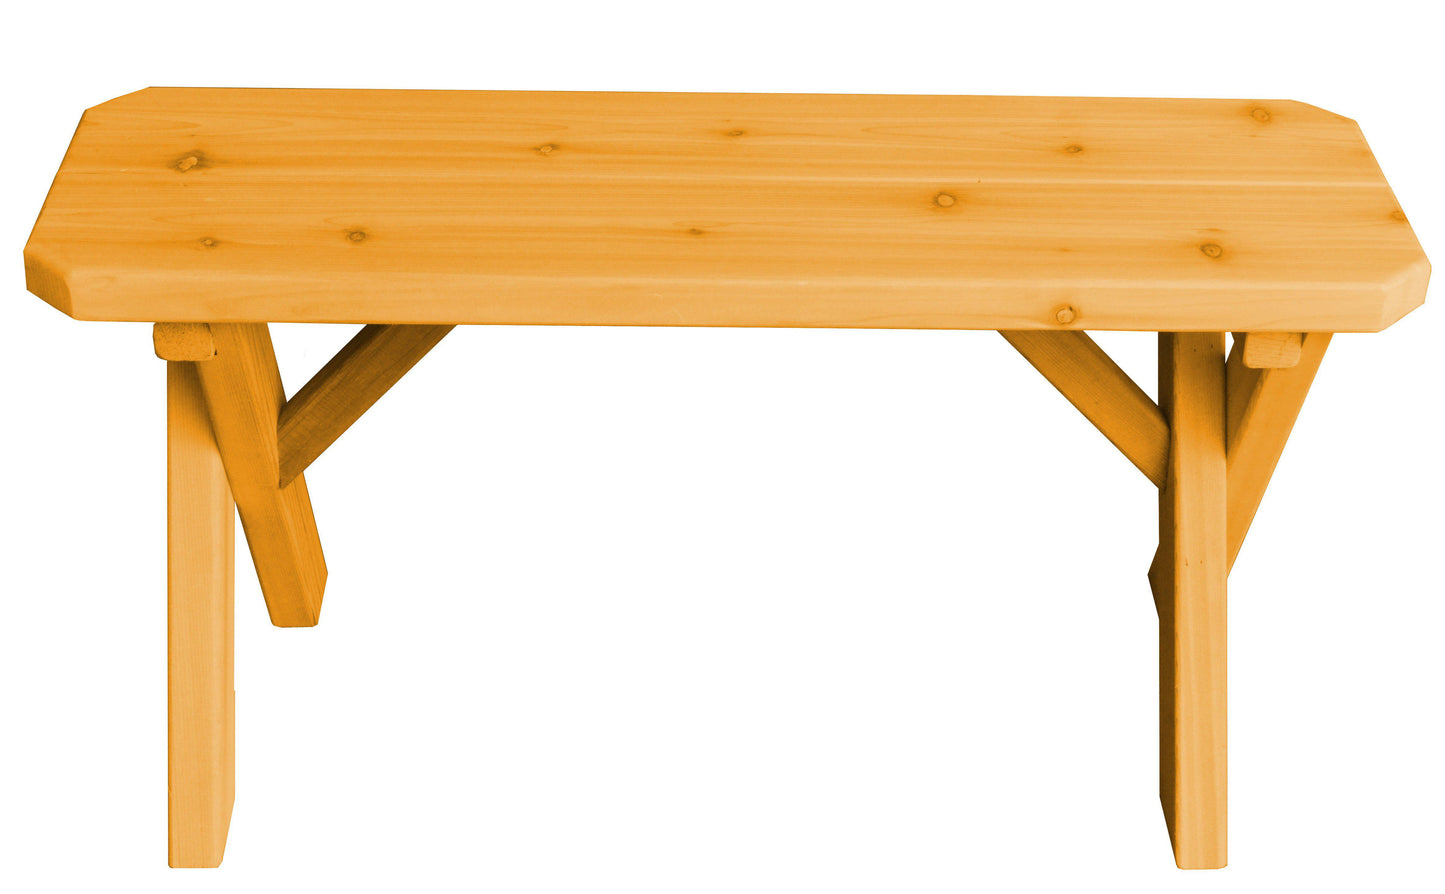 A&L FURNITURE CO. Western Red Cedar  55" Crossleg Bench Only - LEAD TIME TO SHIP 2 WEEKS